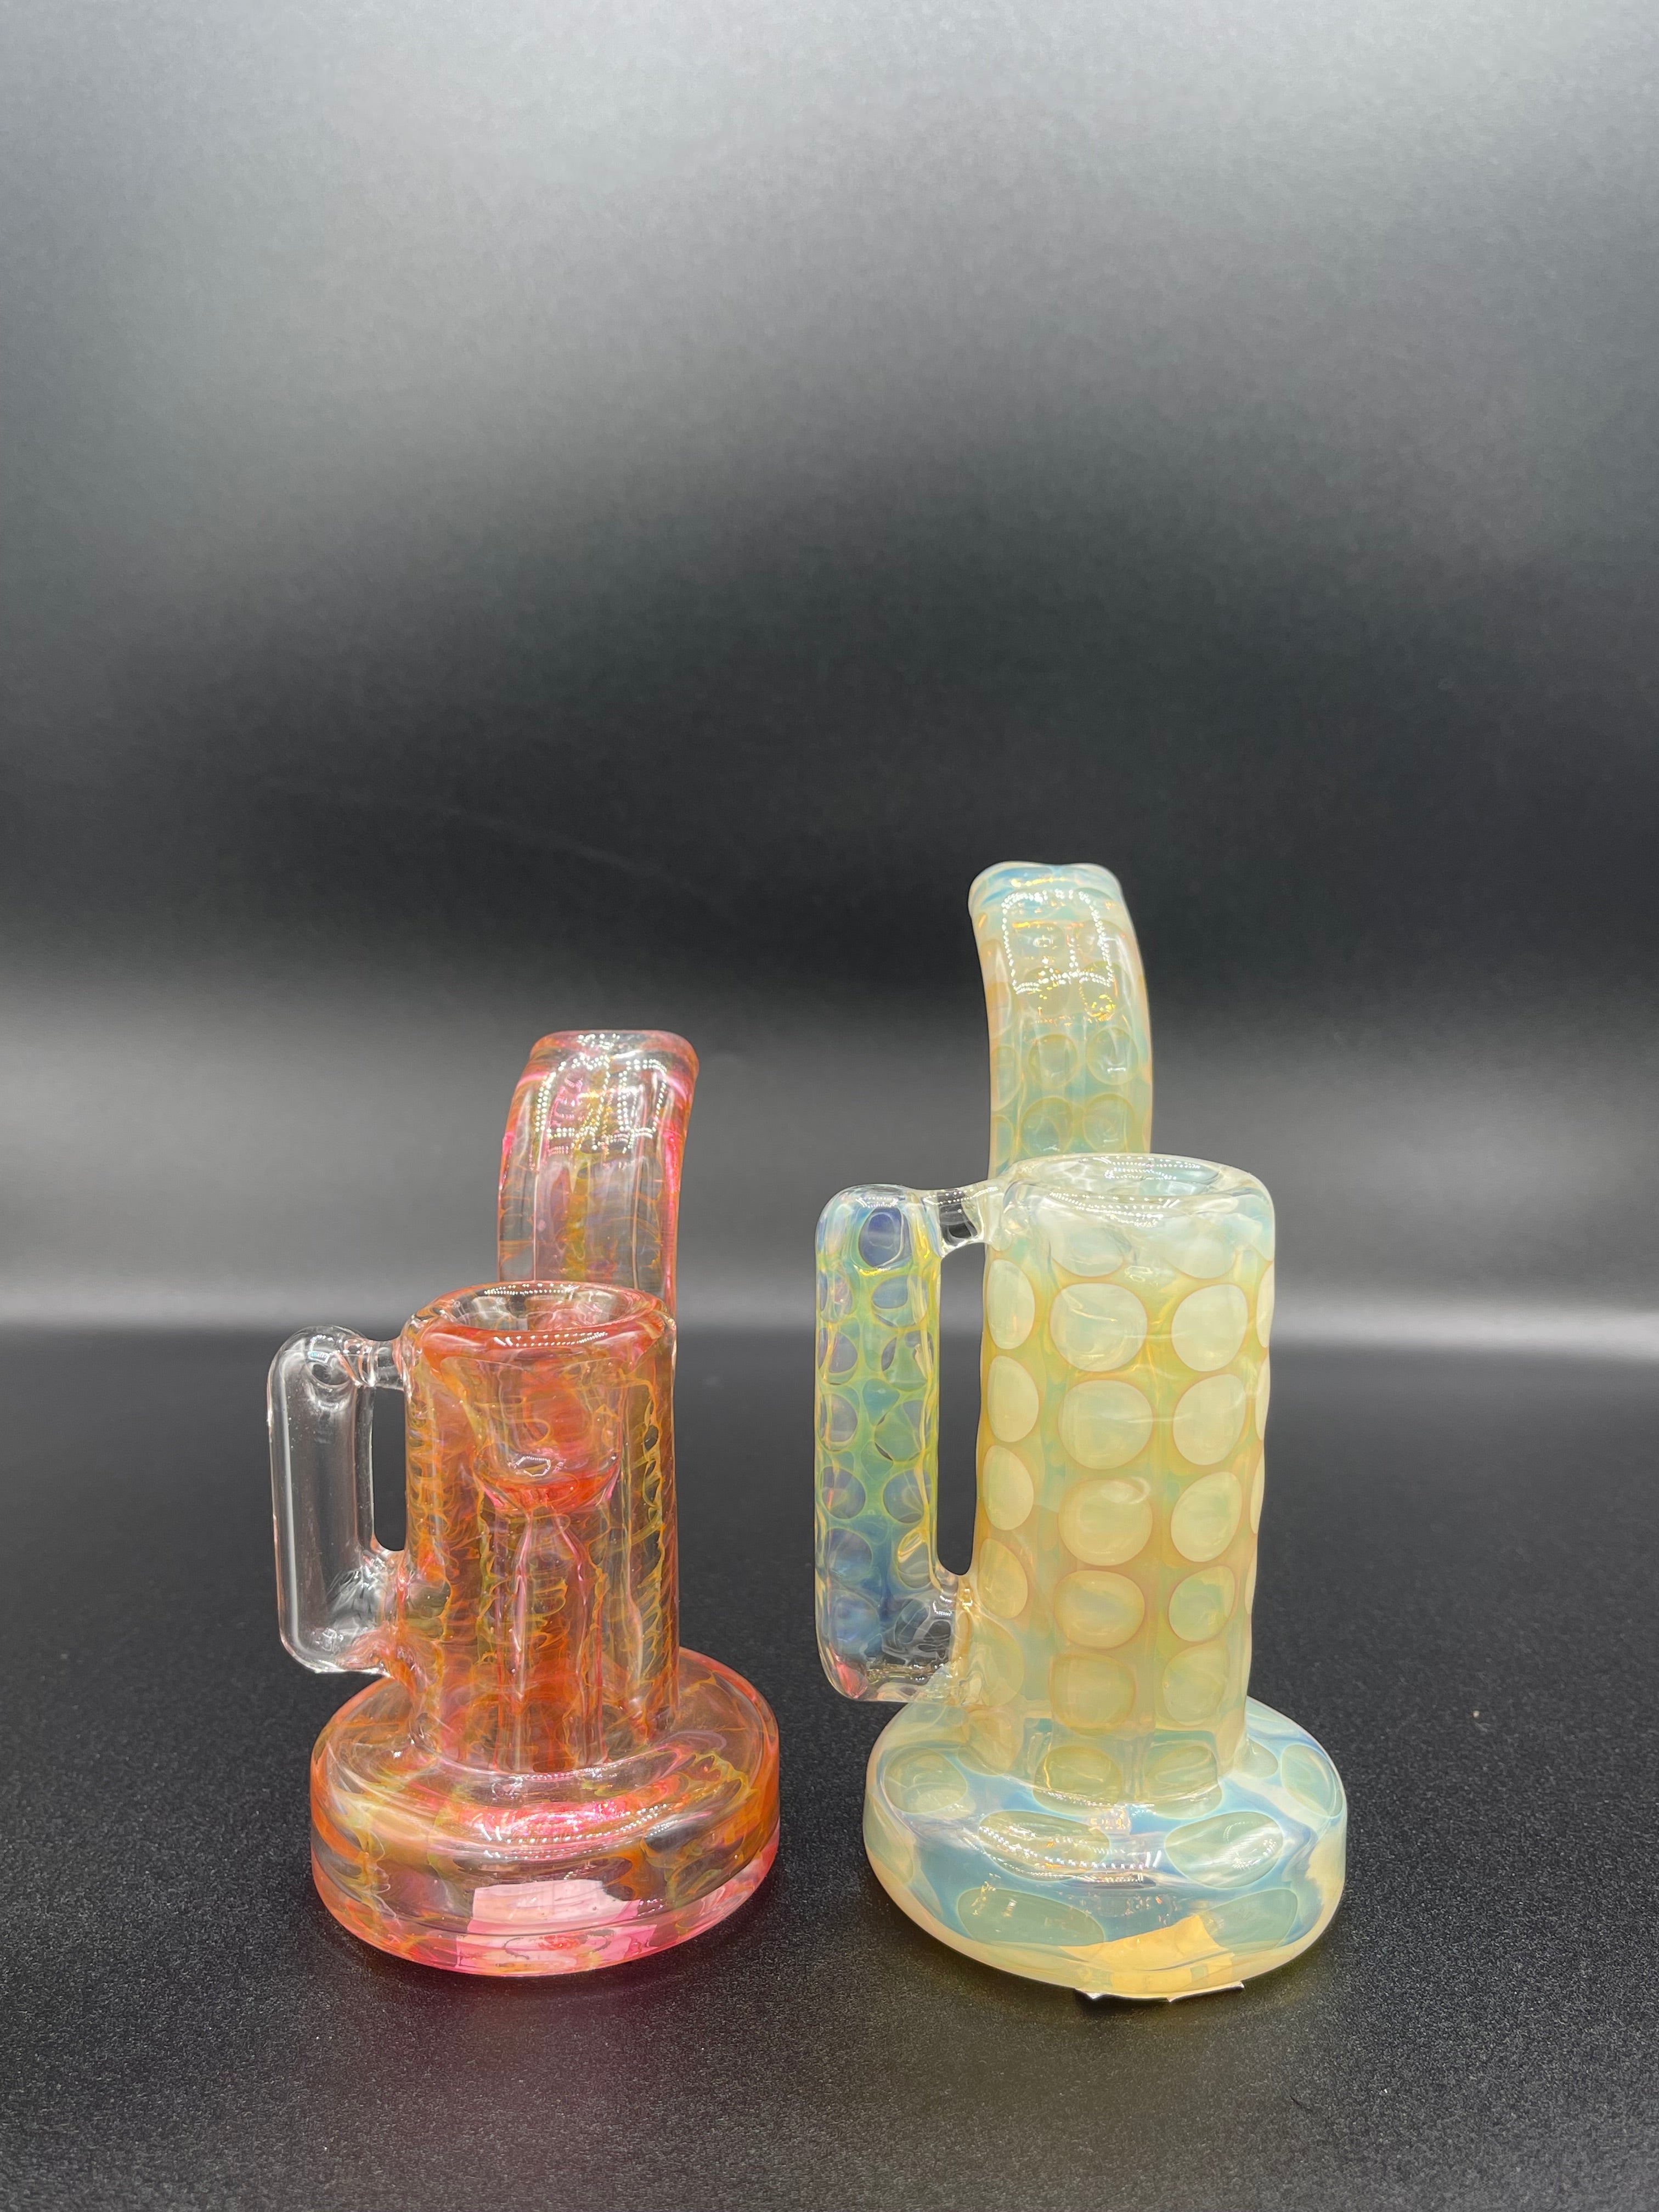 Bubblers by Opinicus9